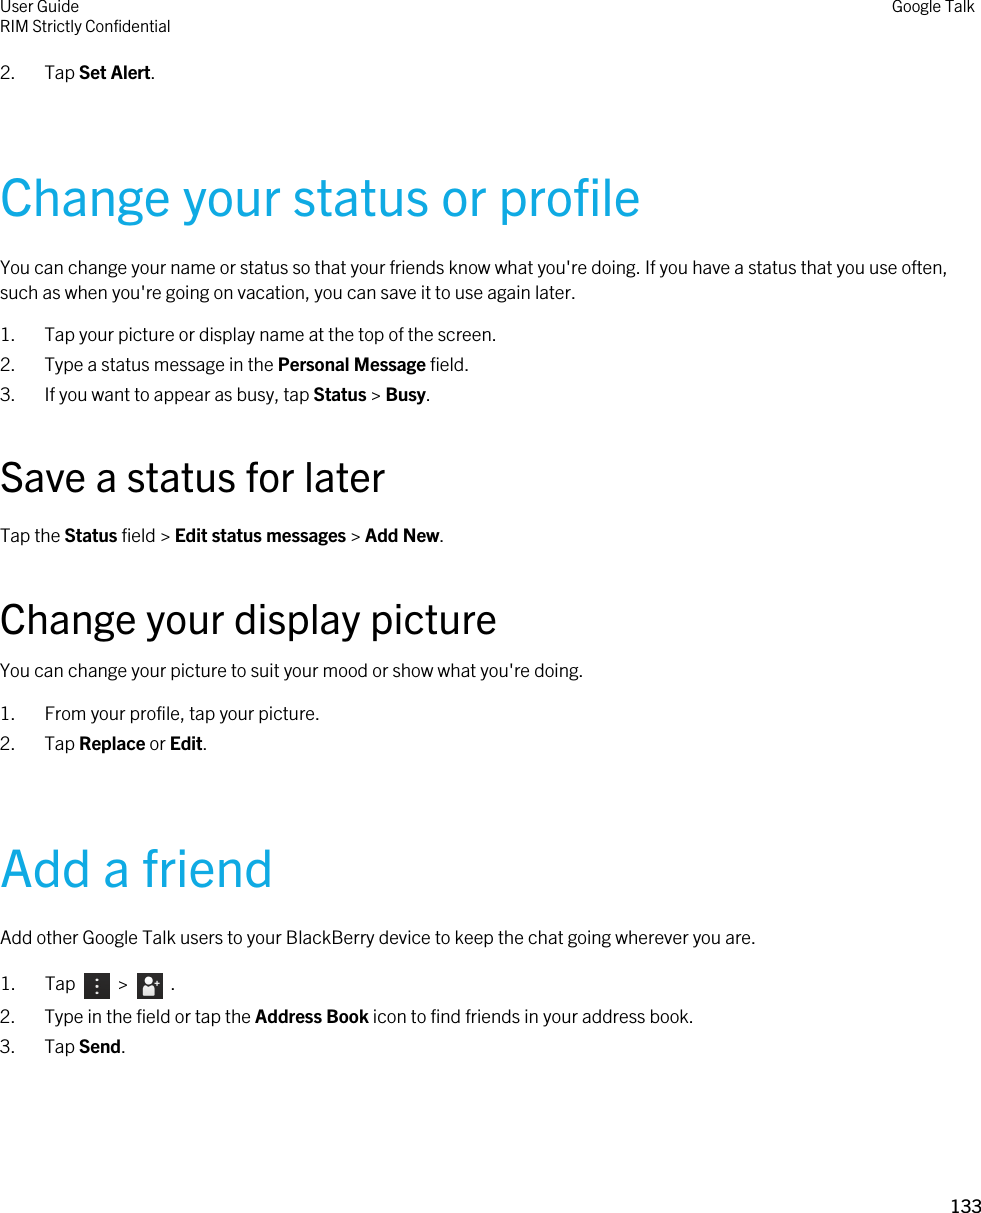 2. Tap Set Alert.Change your status or profileYou can change your name or status so that your friends know what you&apos;re doing. If you have a status that you use often, such as when you&apos;re going on vacation, you can save it to use again later.1. Tap your picture or display name at the top of the screen.2. Type a status message in the Personal Message field.3. If you want to appear as busy, tap Status &gt; Busy.Save a status for laterTap the Status field &gt; Edit status messages &gt; Add New.Change your display pictureYou can change your picture to suit your mood or show what you&apos;re doing.1. From your profile, tap your picture.2. Tap Replace or Edit.Add a friendAdd other Google Talk users to your BlackBerry device to keep the chat going wherever you are.1.  Tap     &gt;    .2. Type in the field or tap the Address Book icon to find friends in your address book.3. Tap Send.User GuideRIM Strictly Confidential Google Talk133 